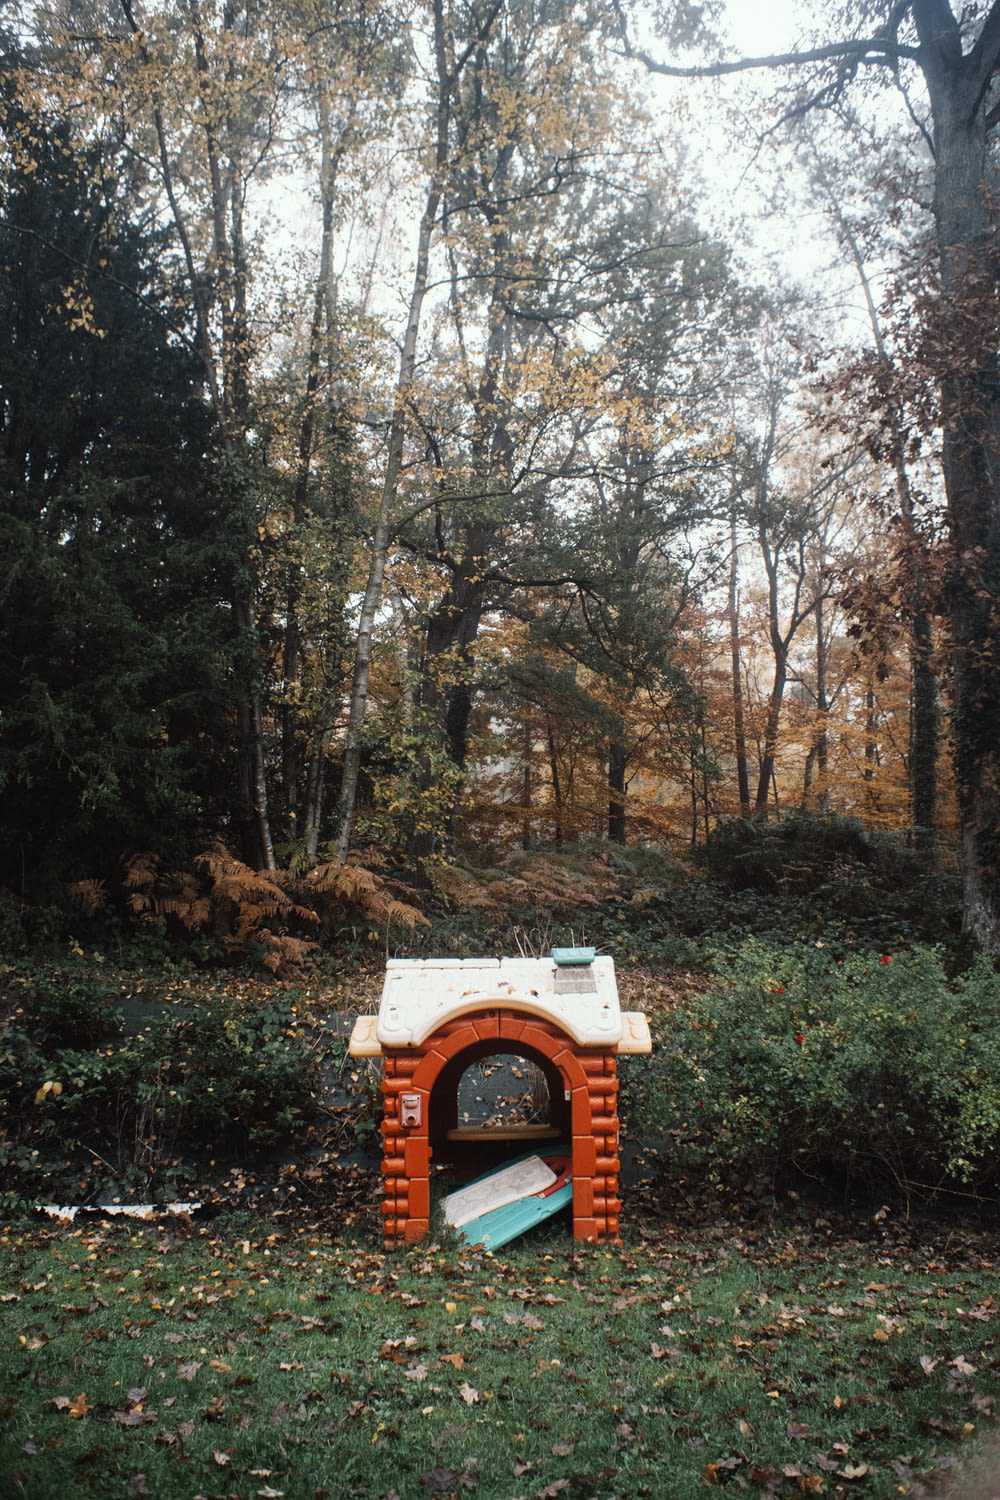 a small brick oven in the middle of a forest